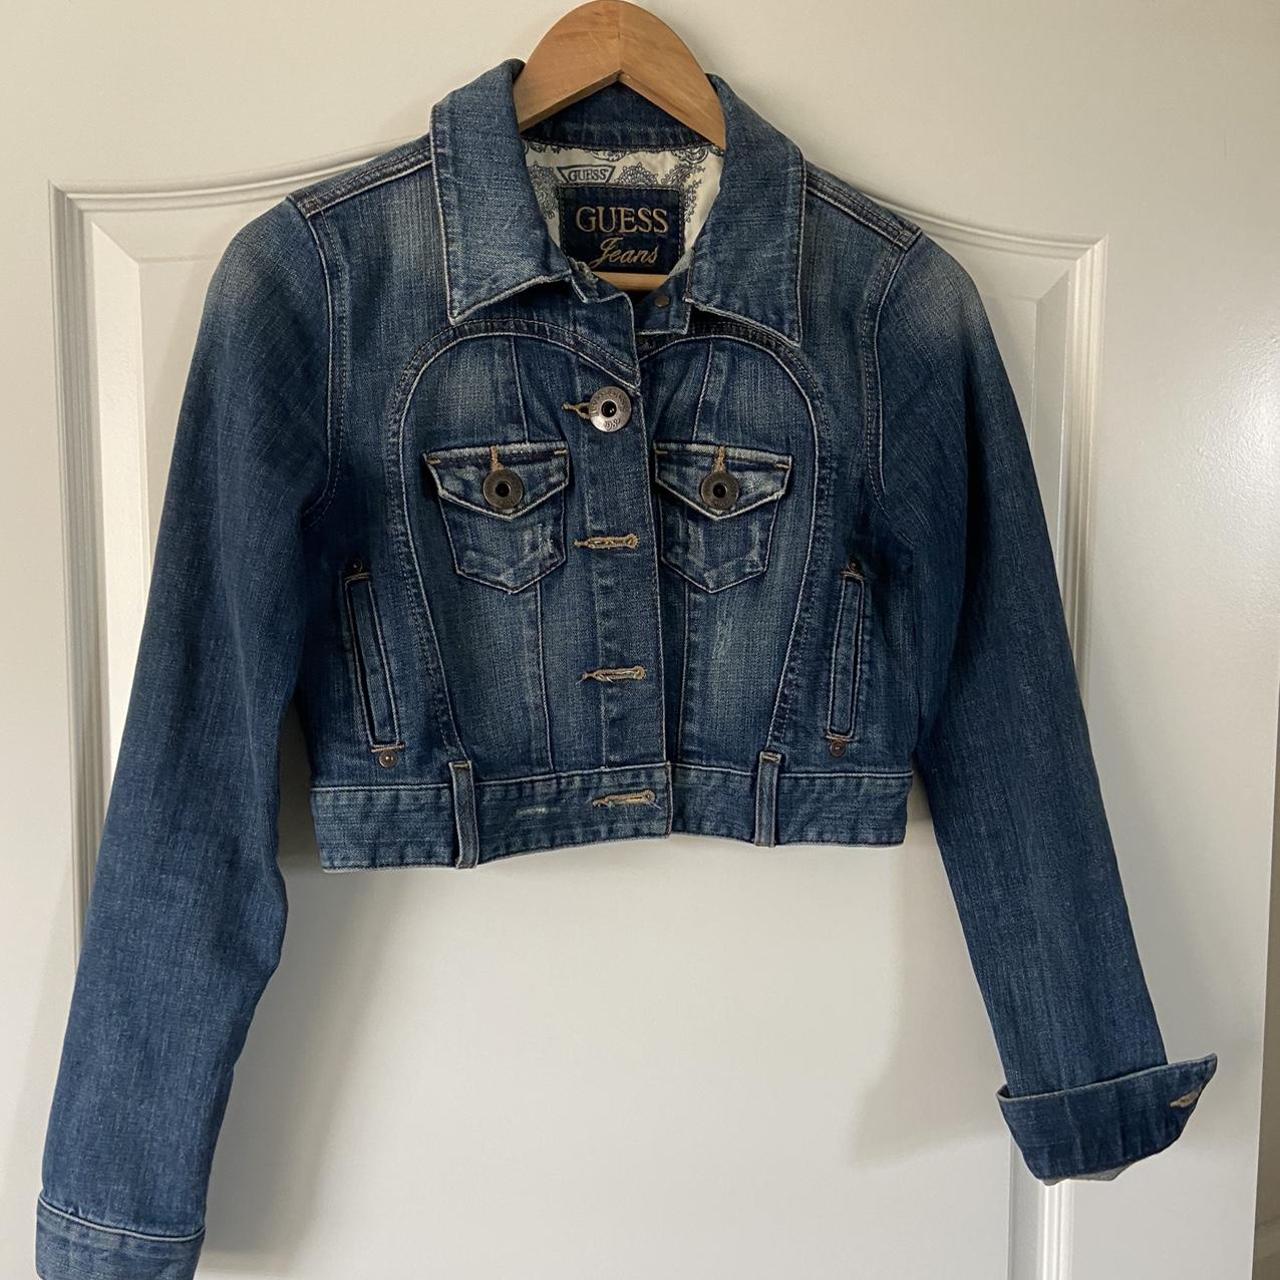 Guess Women's Navy and Blue Jacket